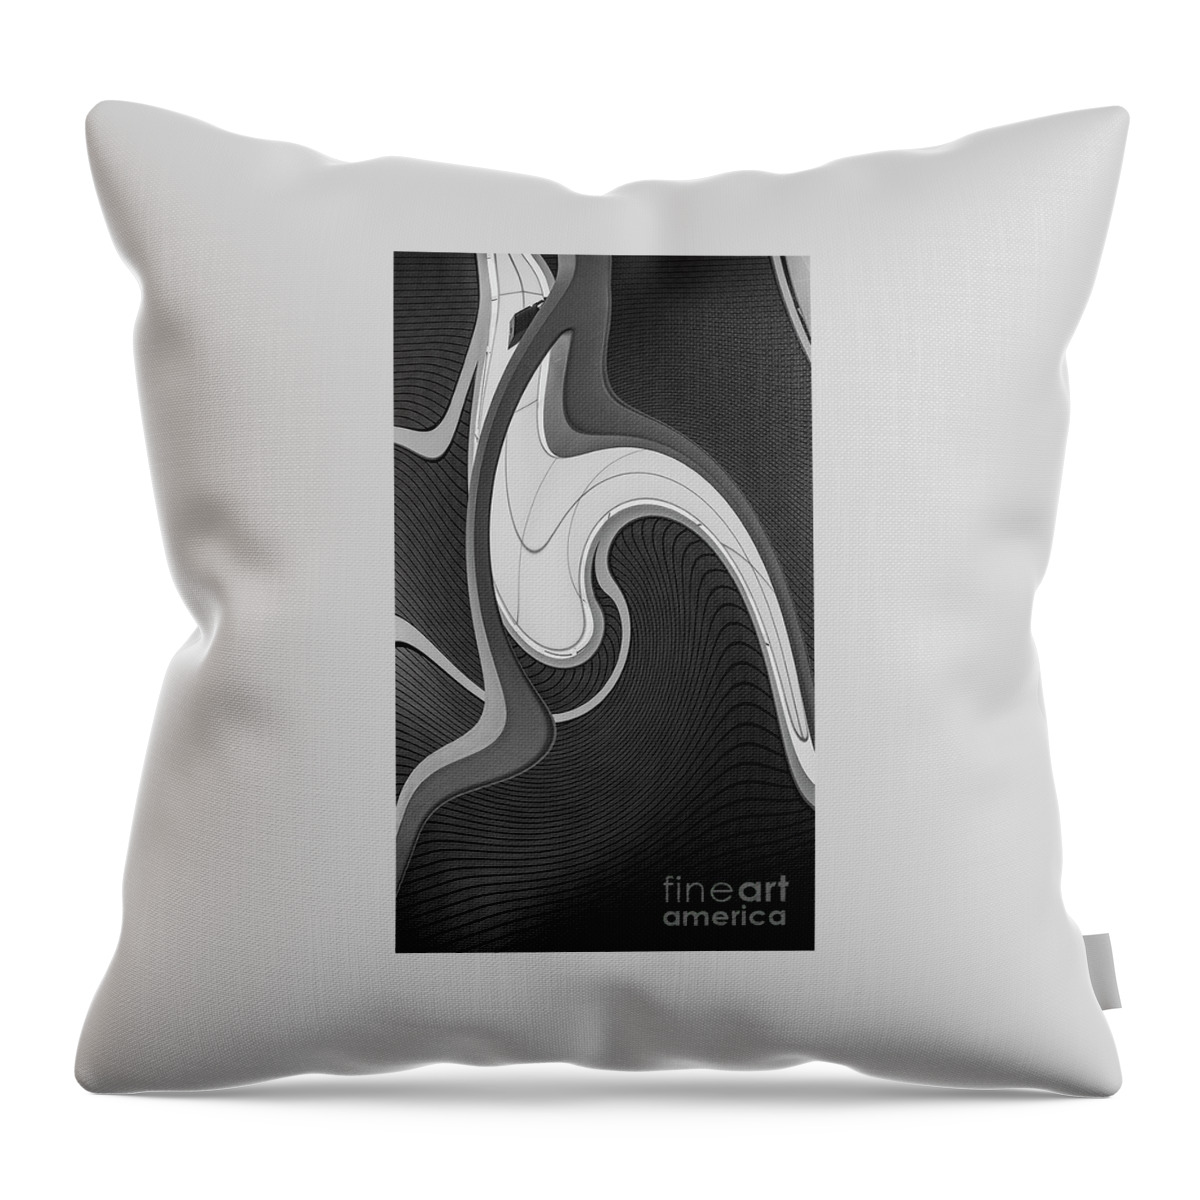 China Throw Pillow featuring the digital art Happiness by Jim Hatch